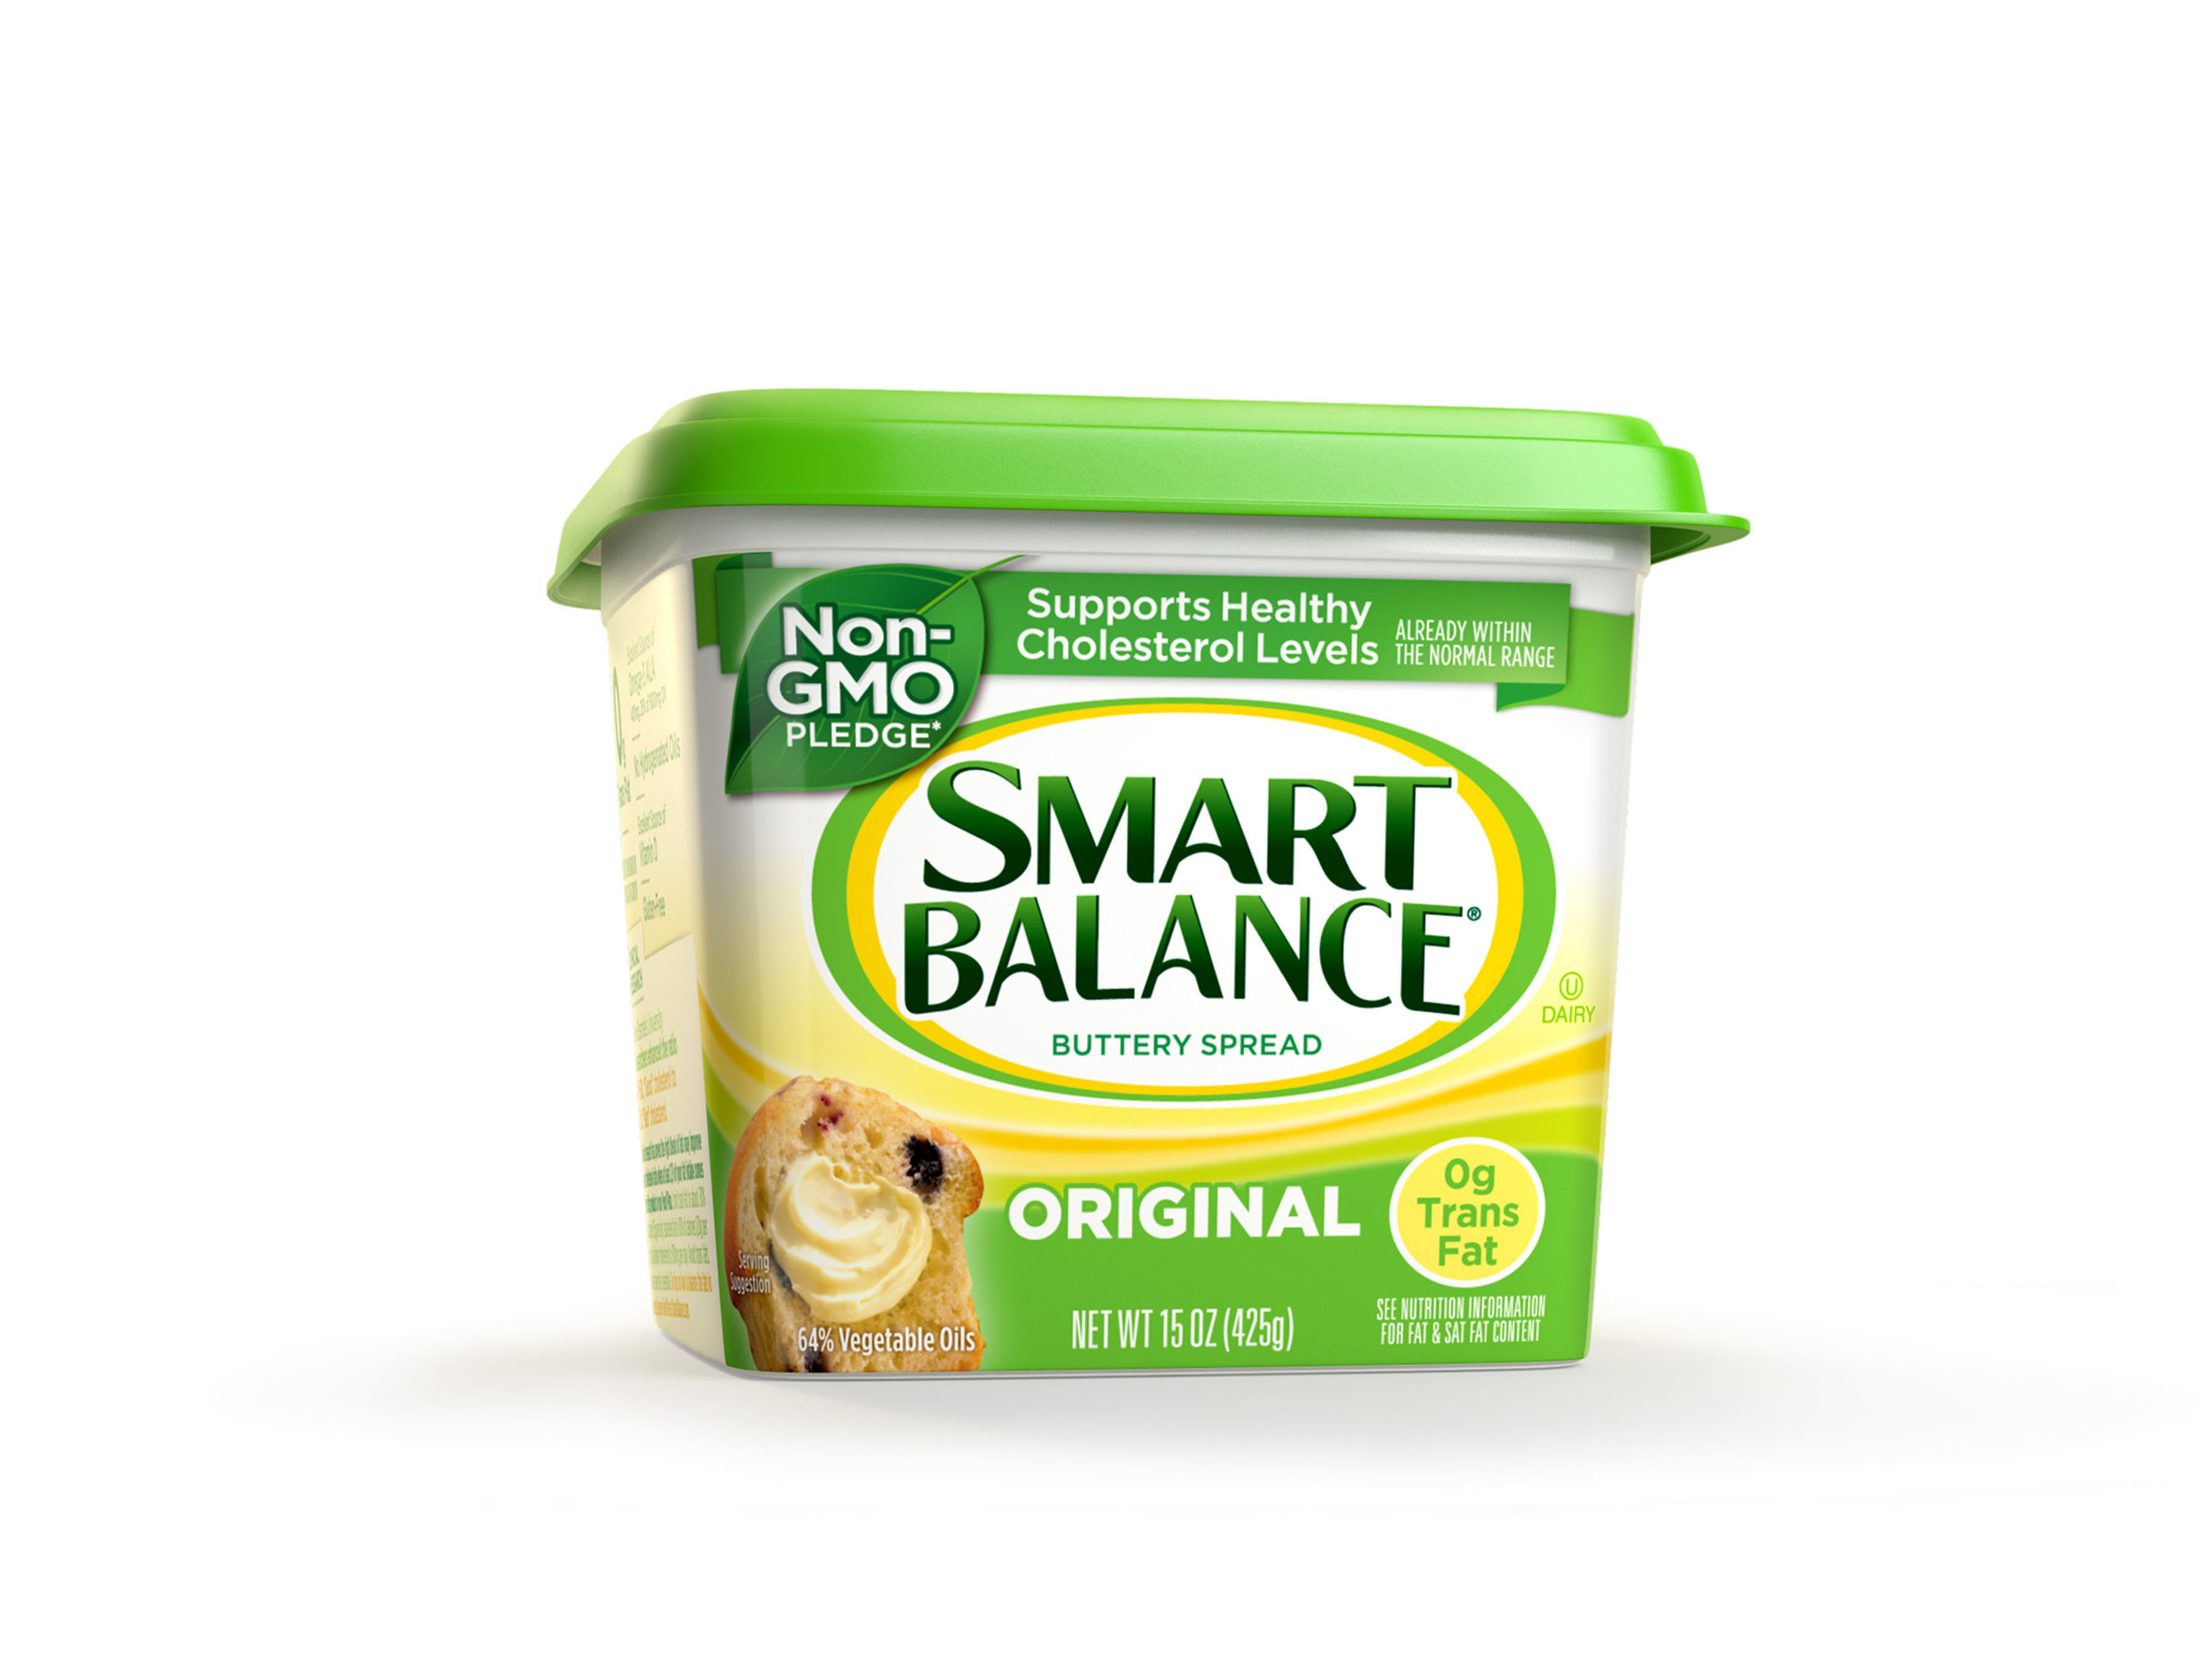 Smart Balance Is First Leading Spread to Transition to Non-GMO